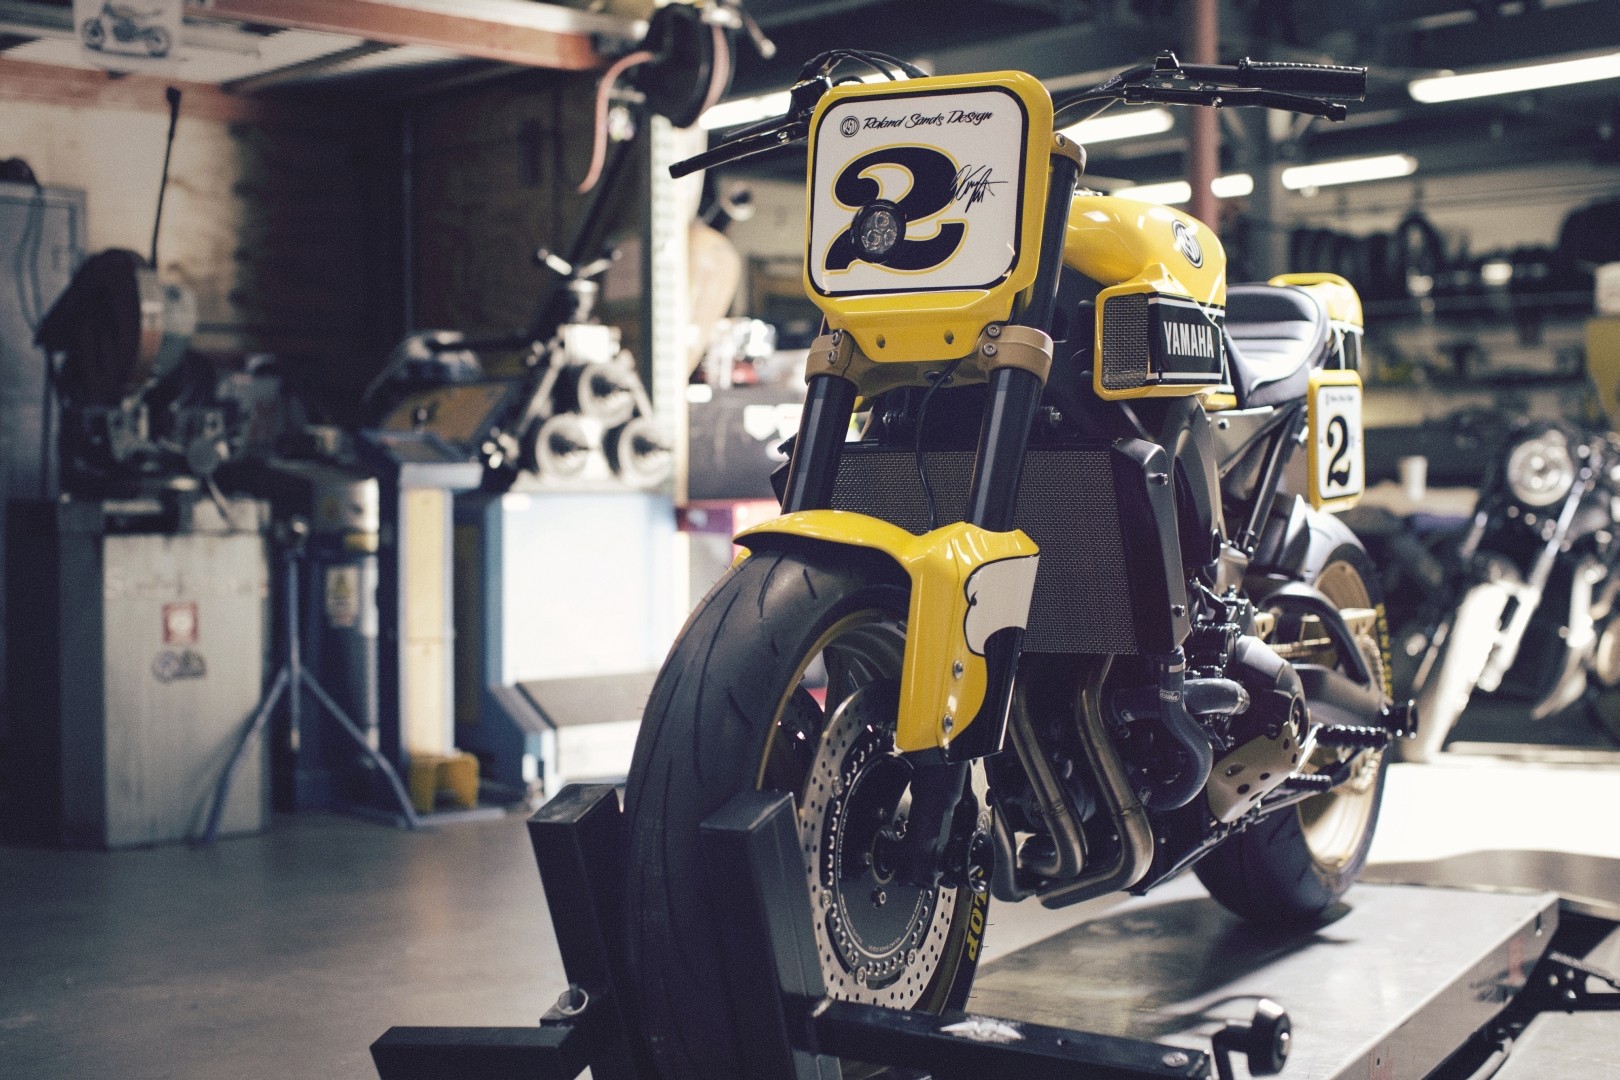 phare - Démontage support de phare et neiman  Roland-sands-faster-wasp-previews-the-yamaha-xsr900-photo-gallery_13